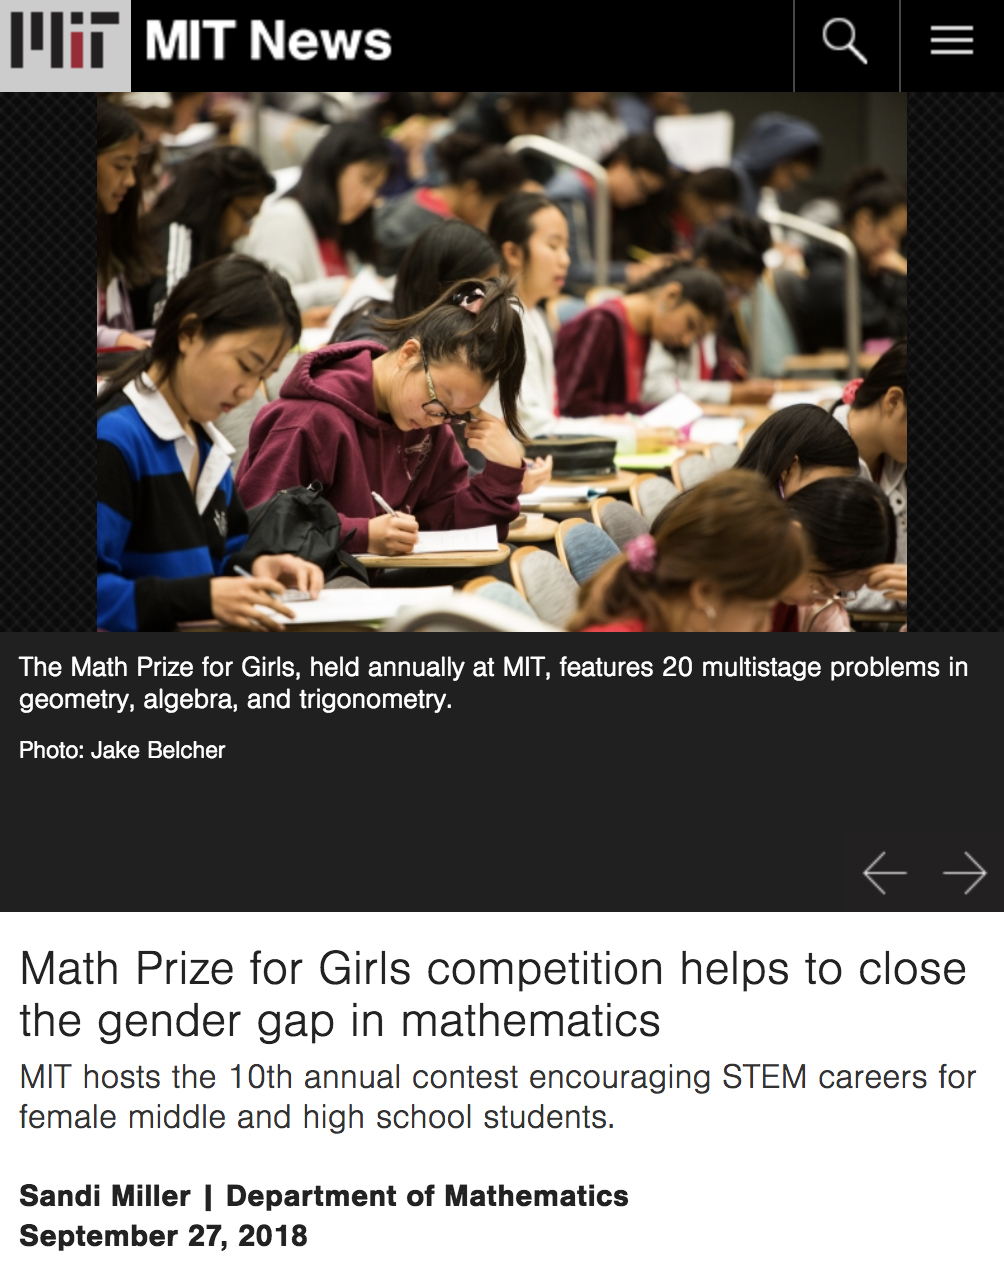 Math Prize for Girls competition helps to close the gender gap in mathematics